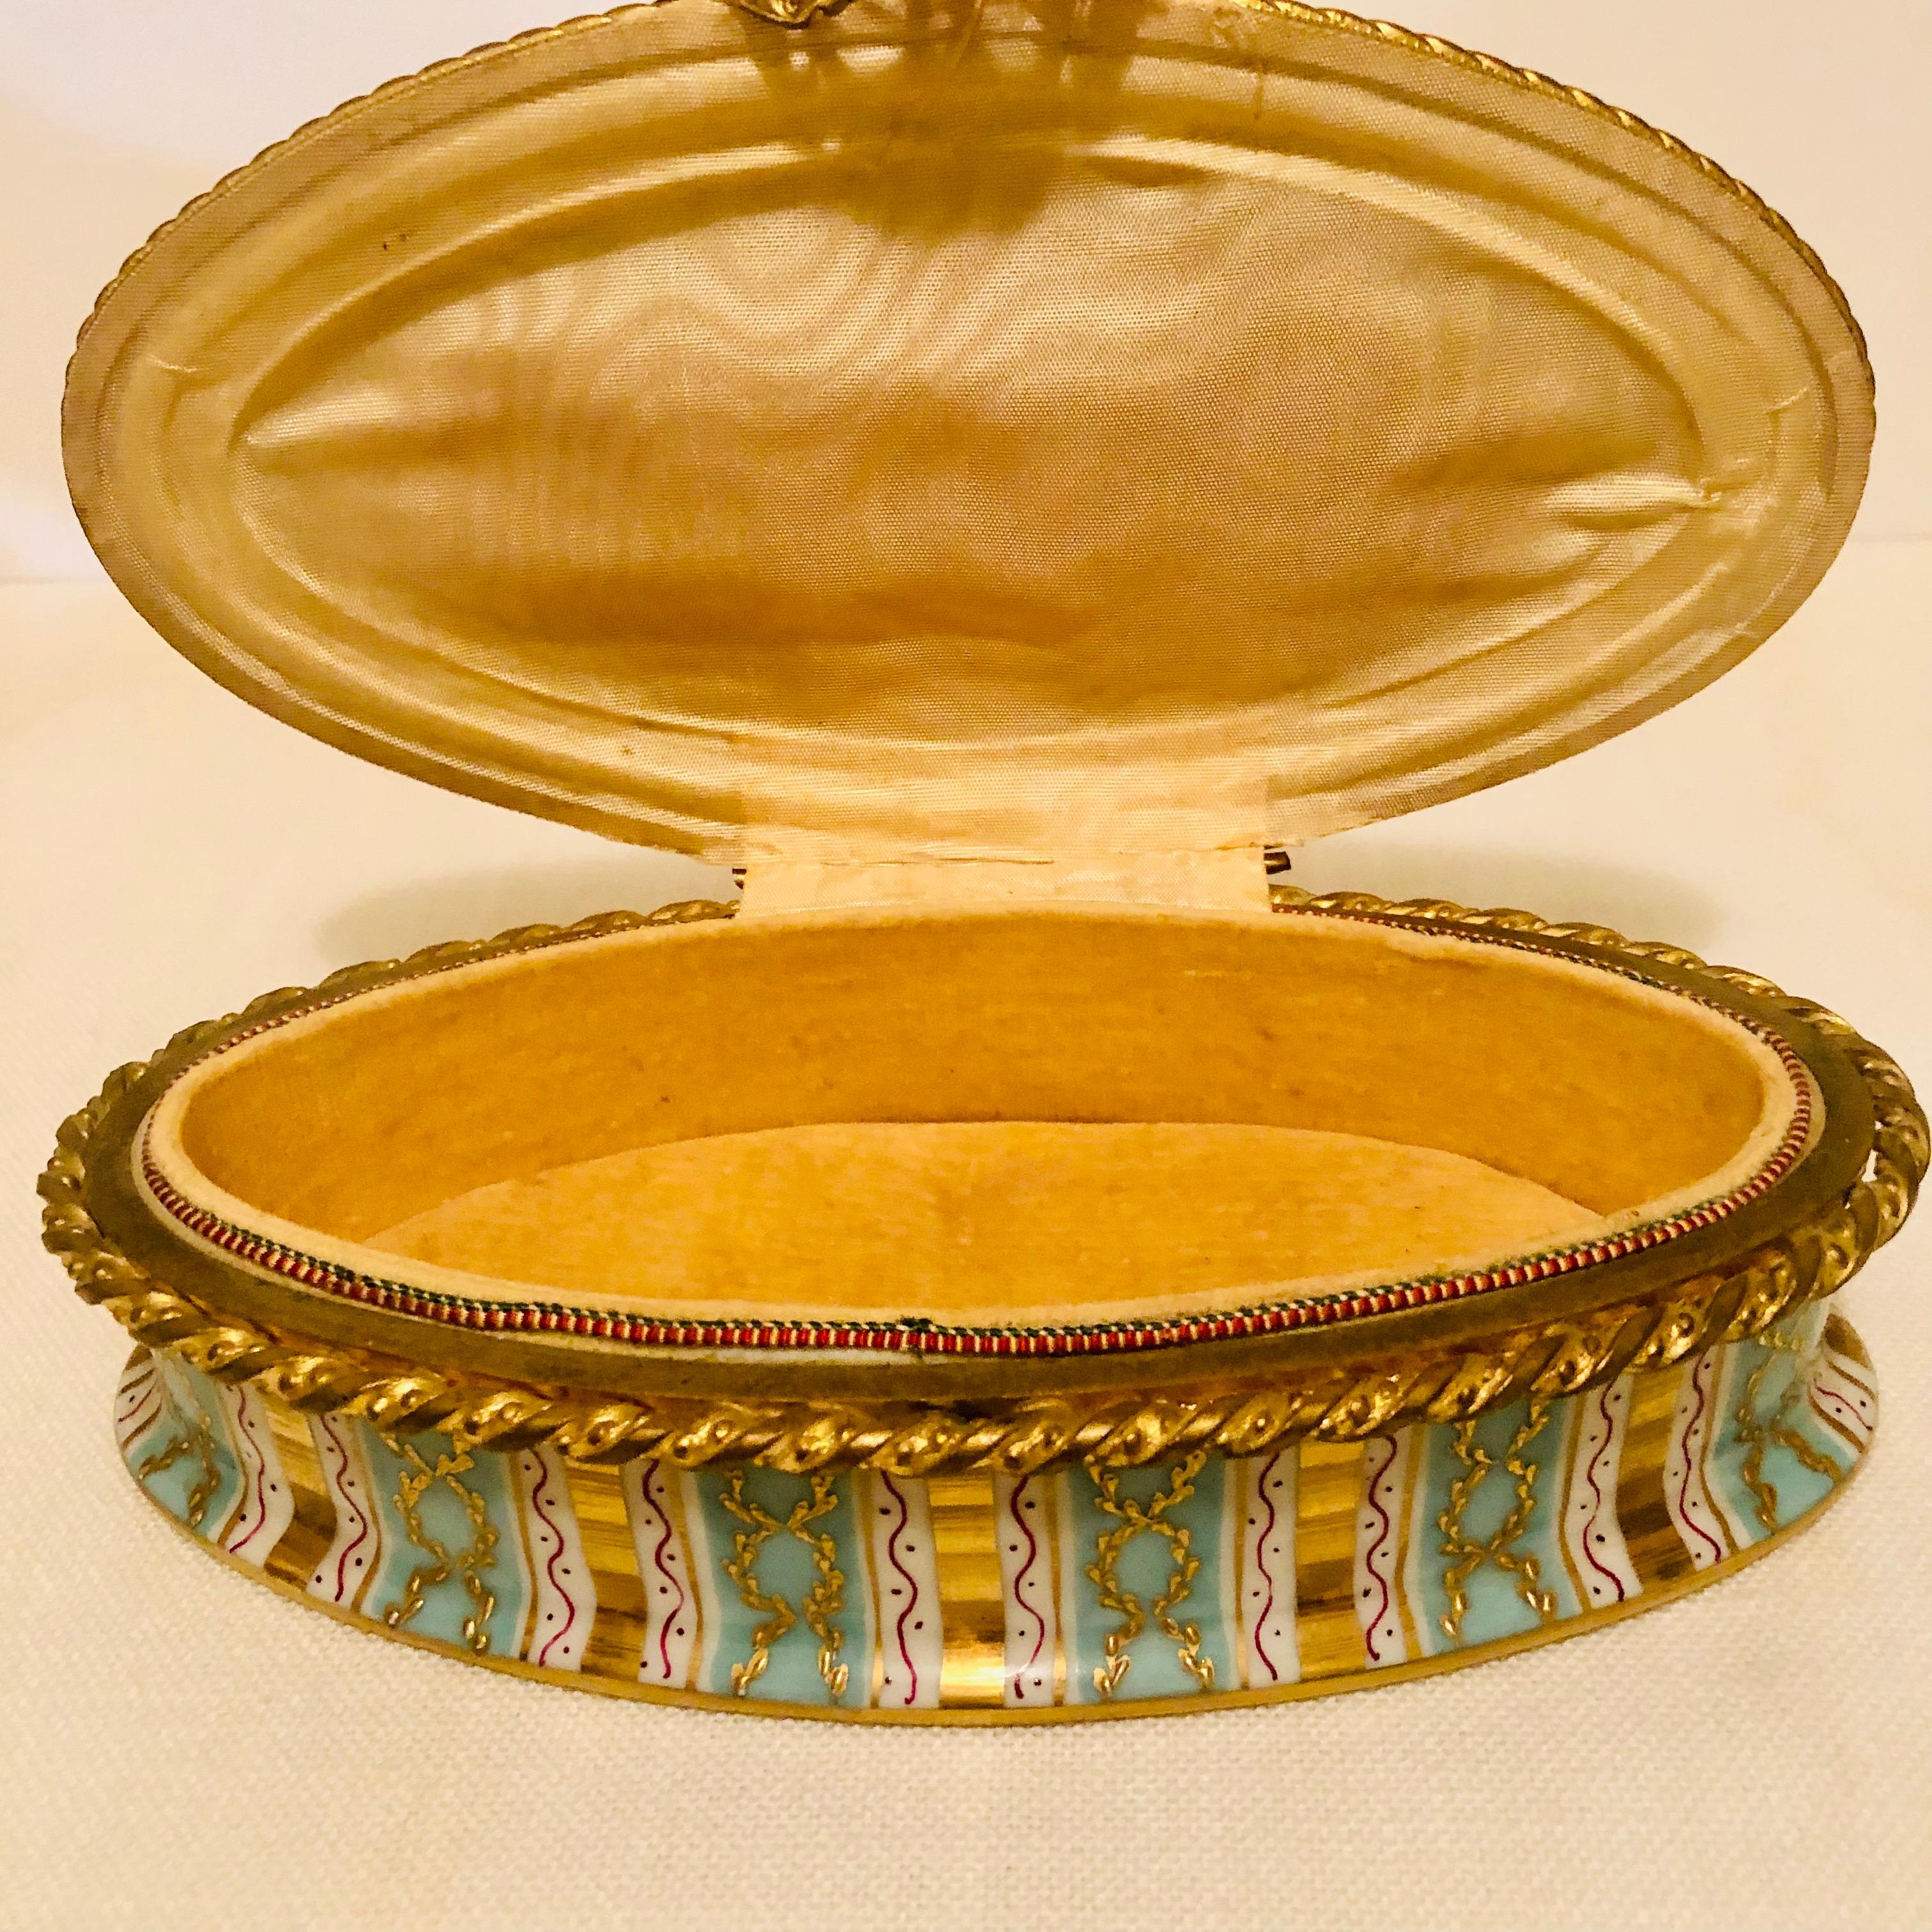 Gilt Le Tallec Box with Aqua and Gold Stripes and Raised Gold Circular Decoration